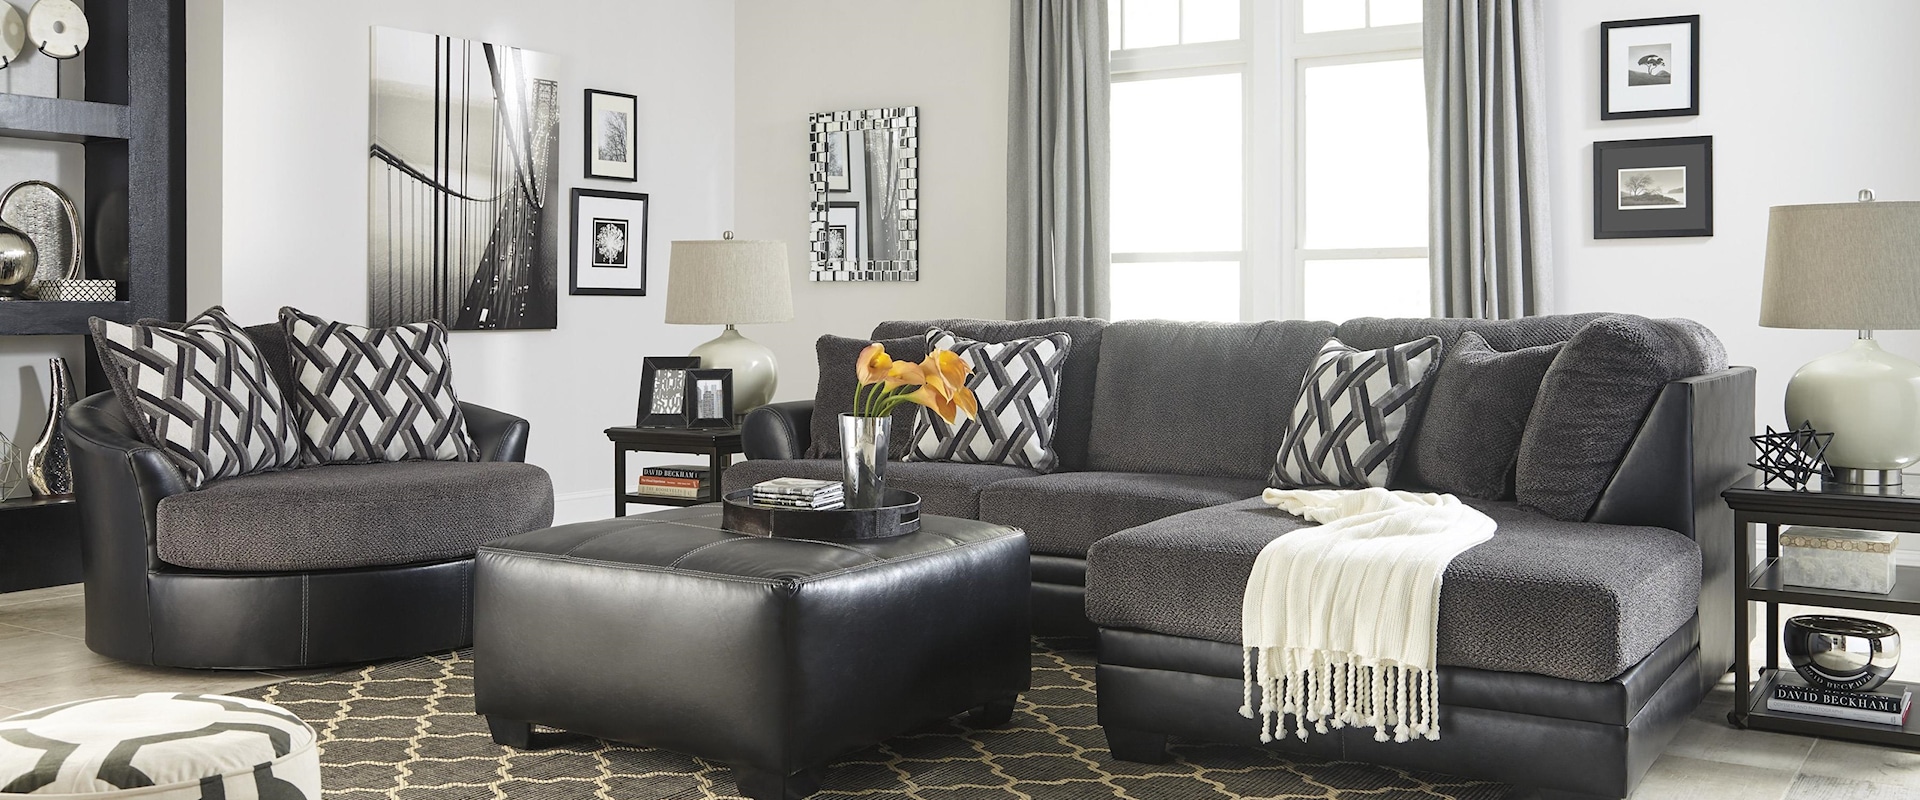 2 Piece Chaise Sectional Sofa and Swivel Accent Chair Set